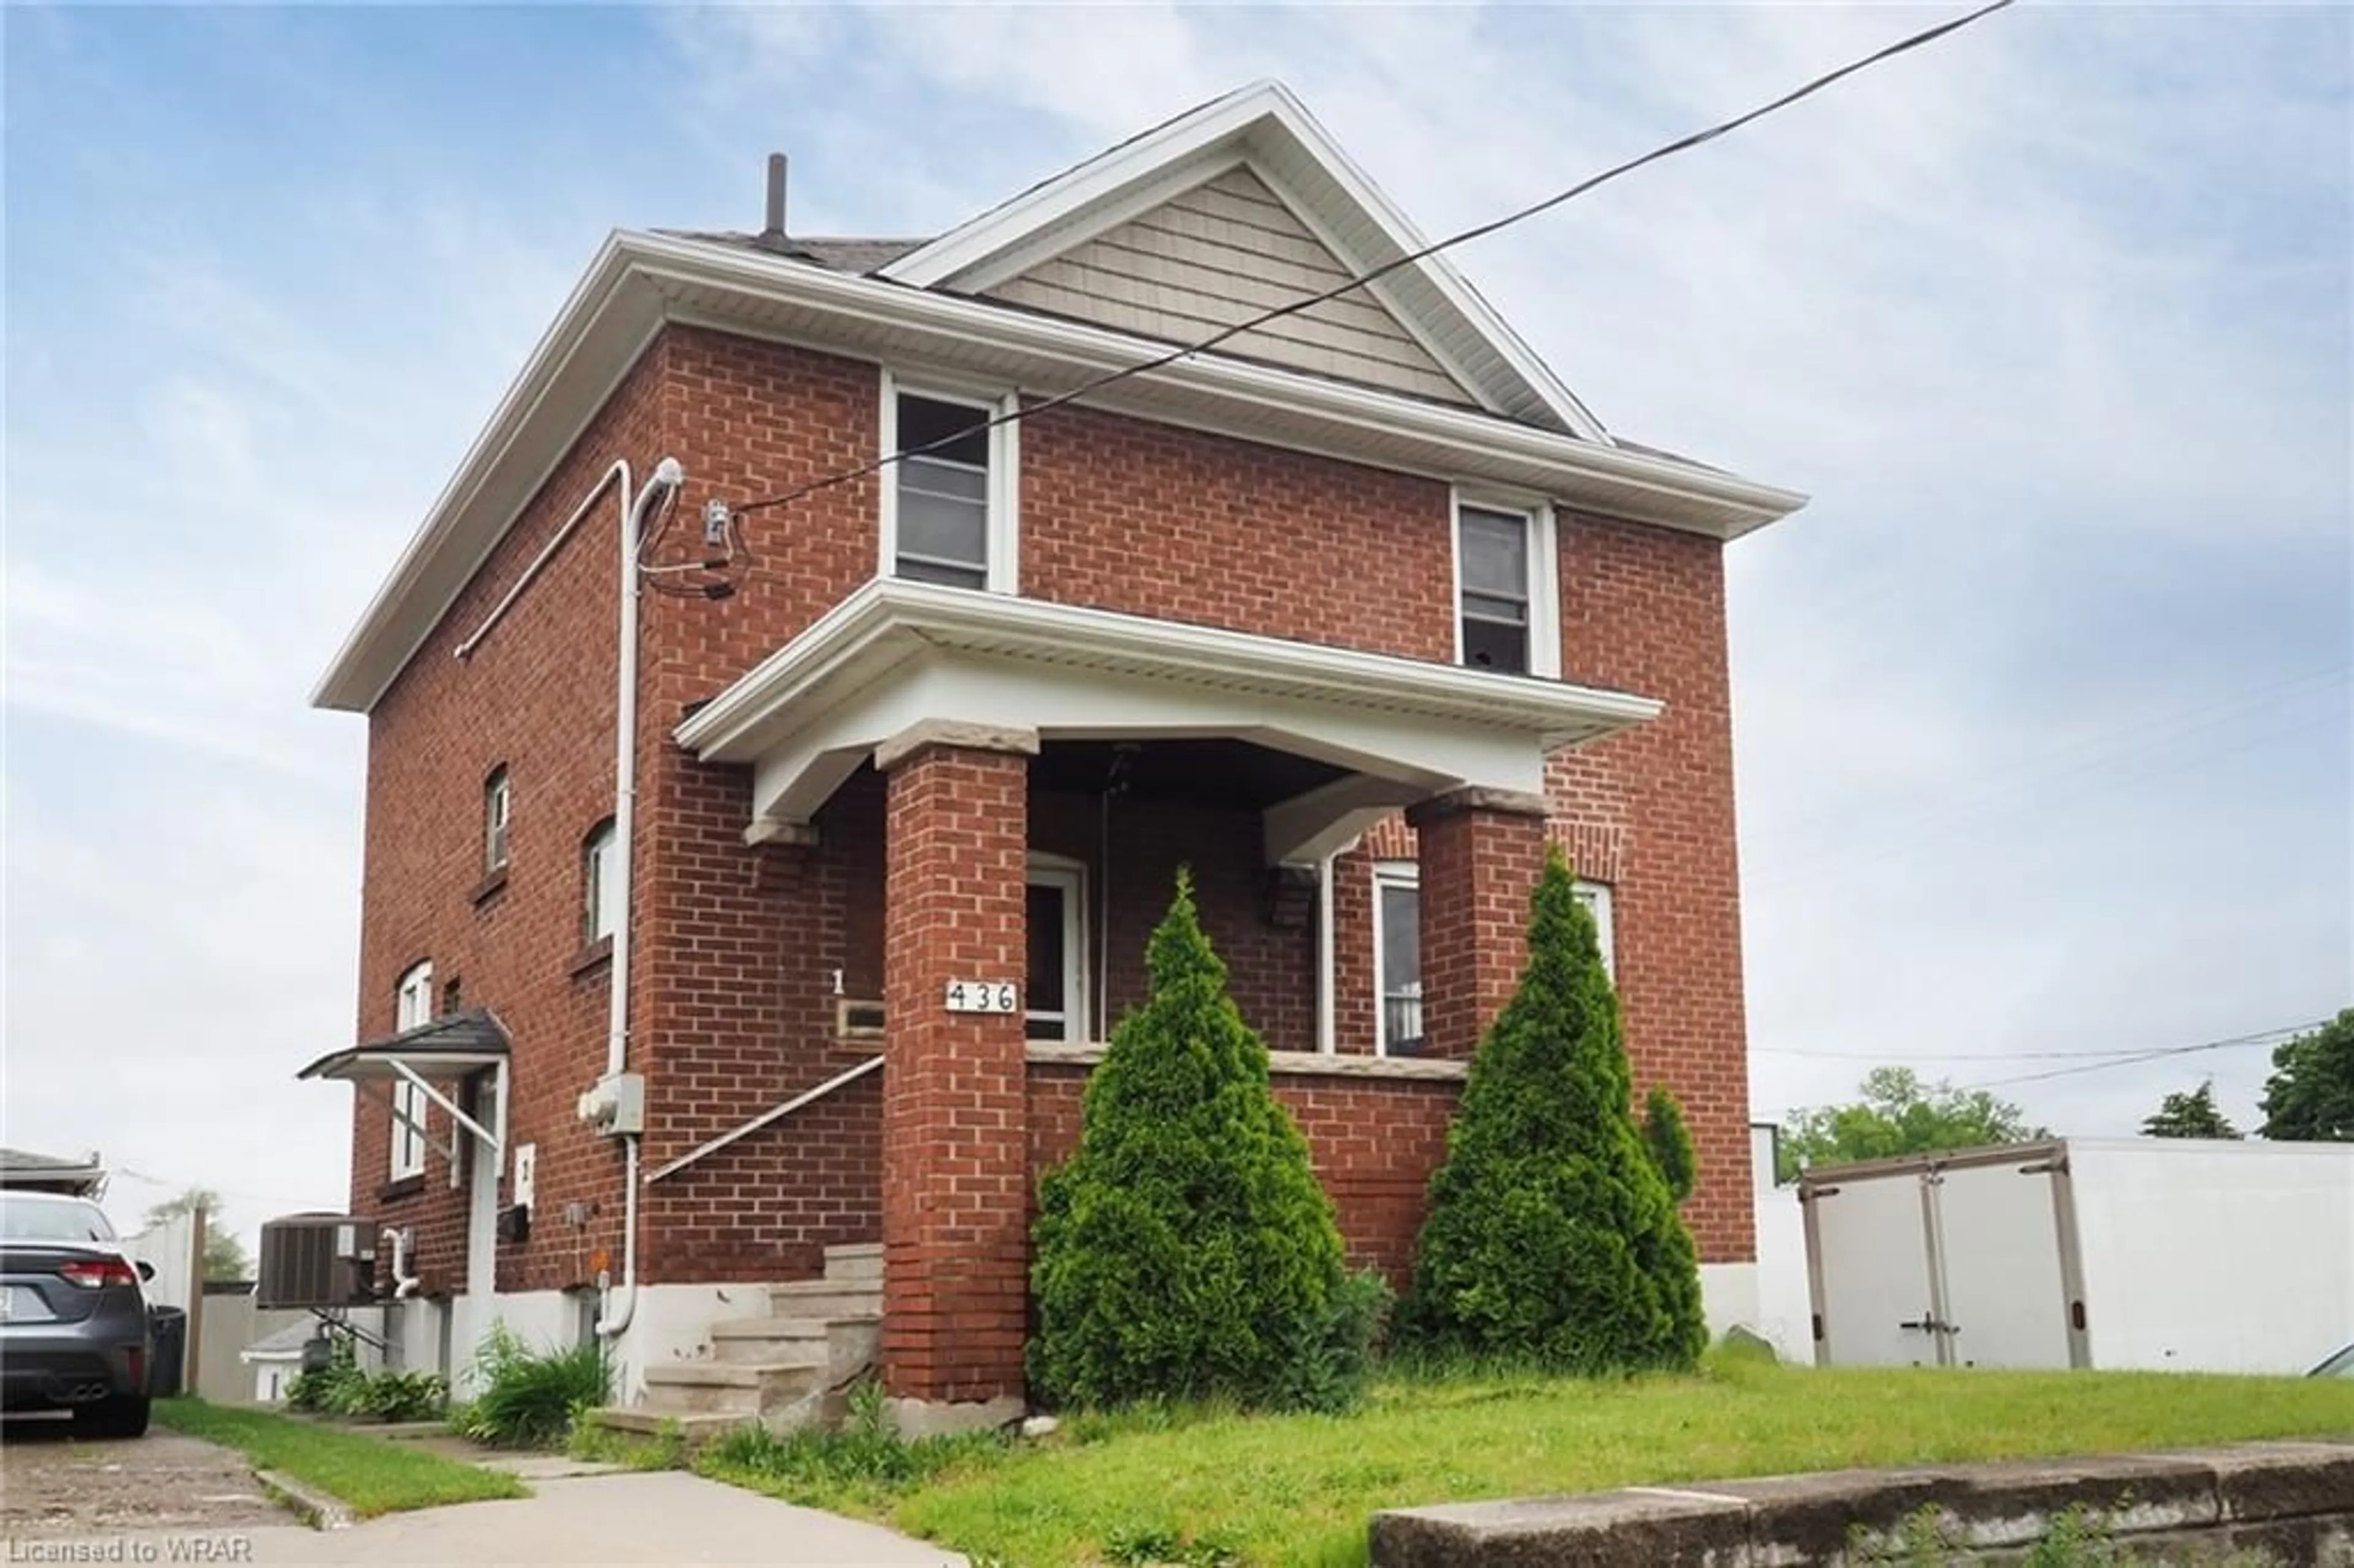 Home with brick exterior material for 436 Courtland Ave, Kitchener Ontario N2G 2W4